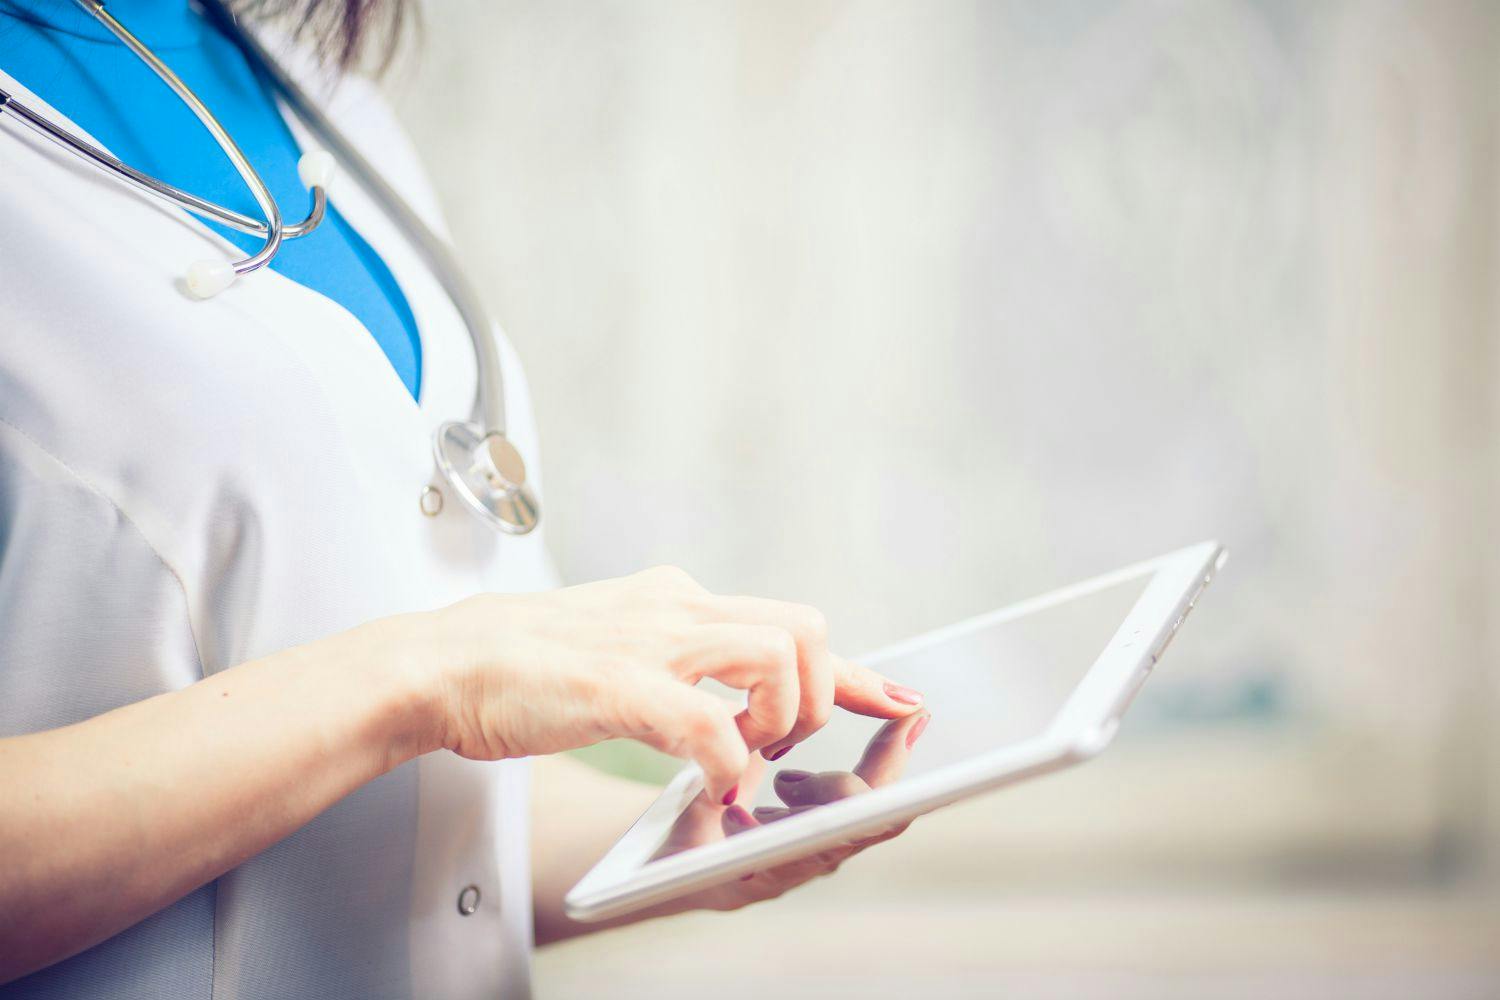 Federated learning may provide a solution for future digital health challenges